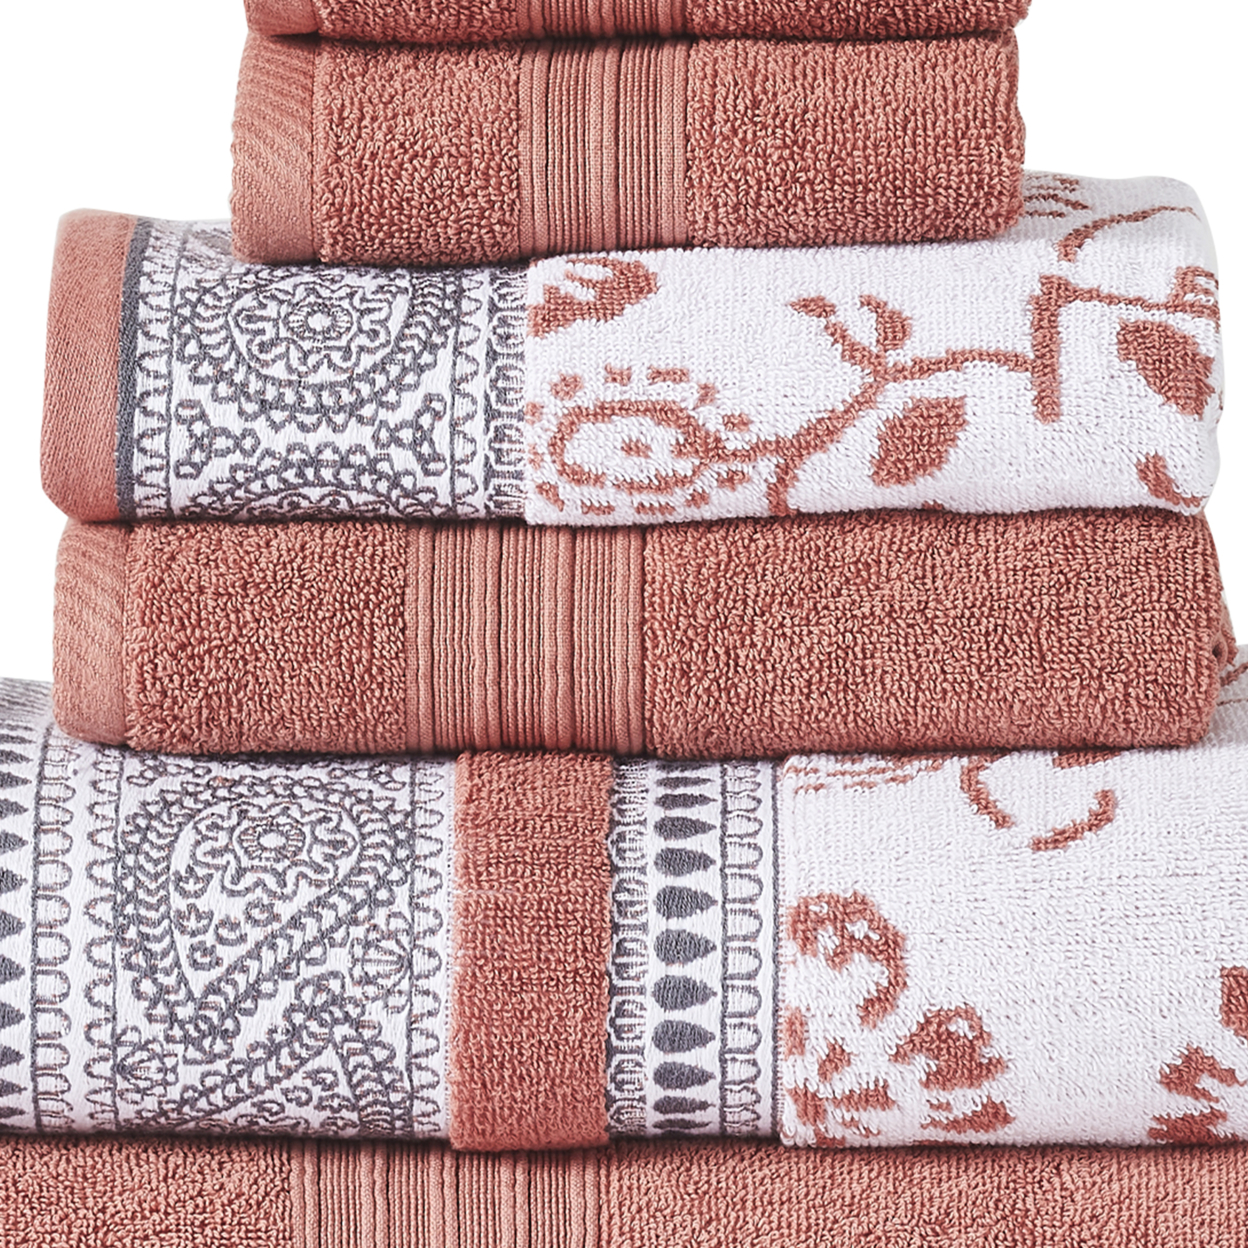 Veria 6 Piece Towel Set With Paisley And Floral Pattern The Urban Port, Peach- Saltoro Sherpi